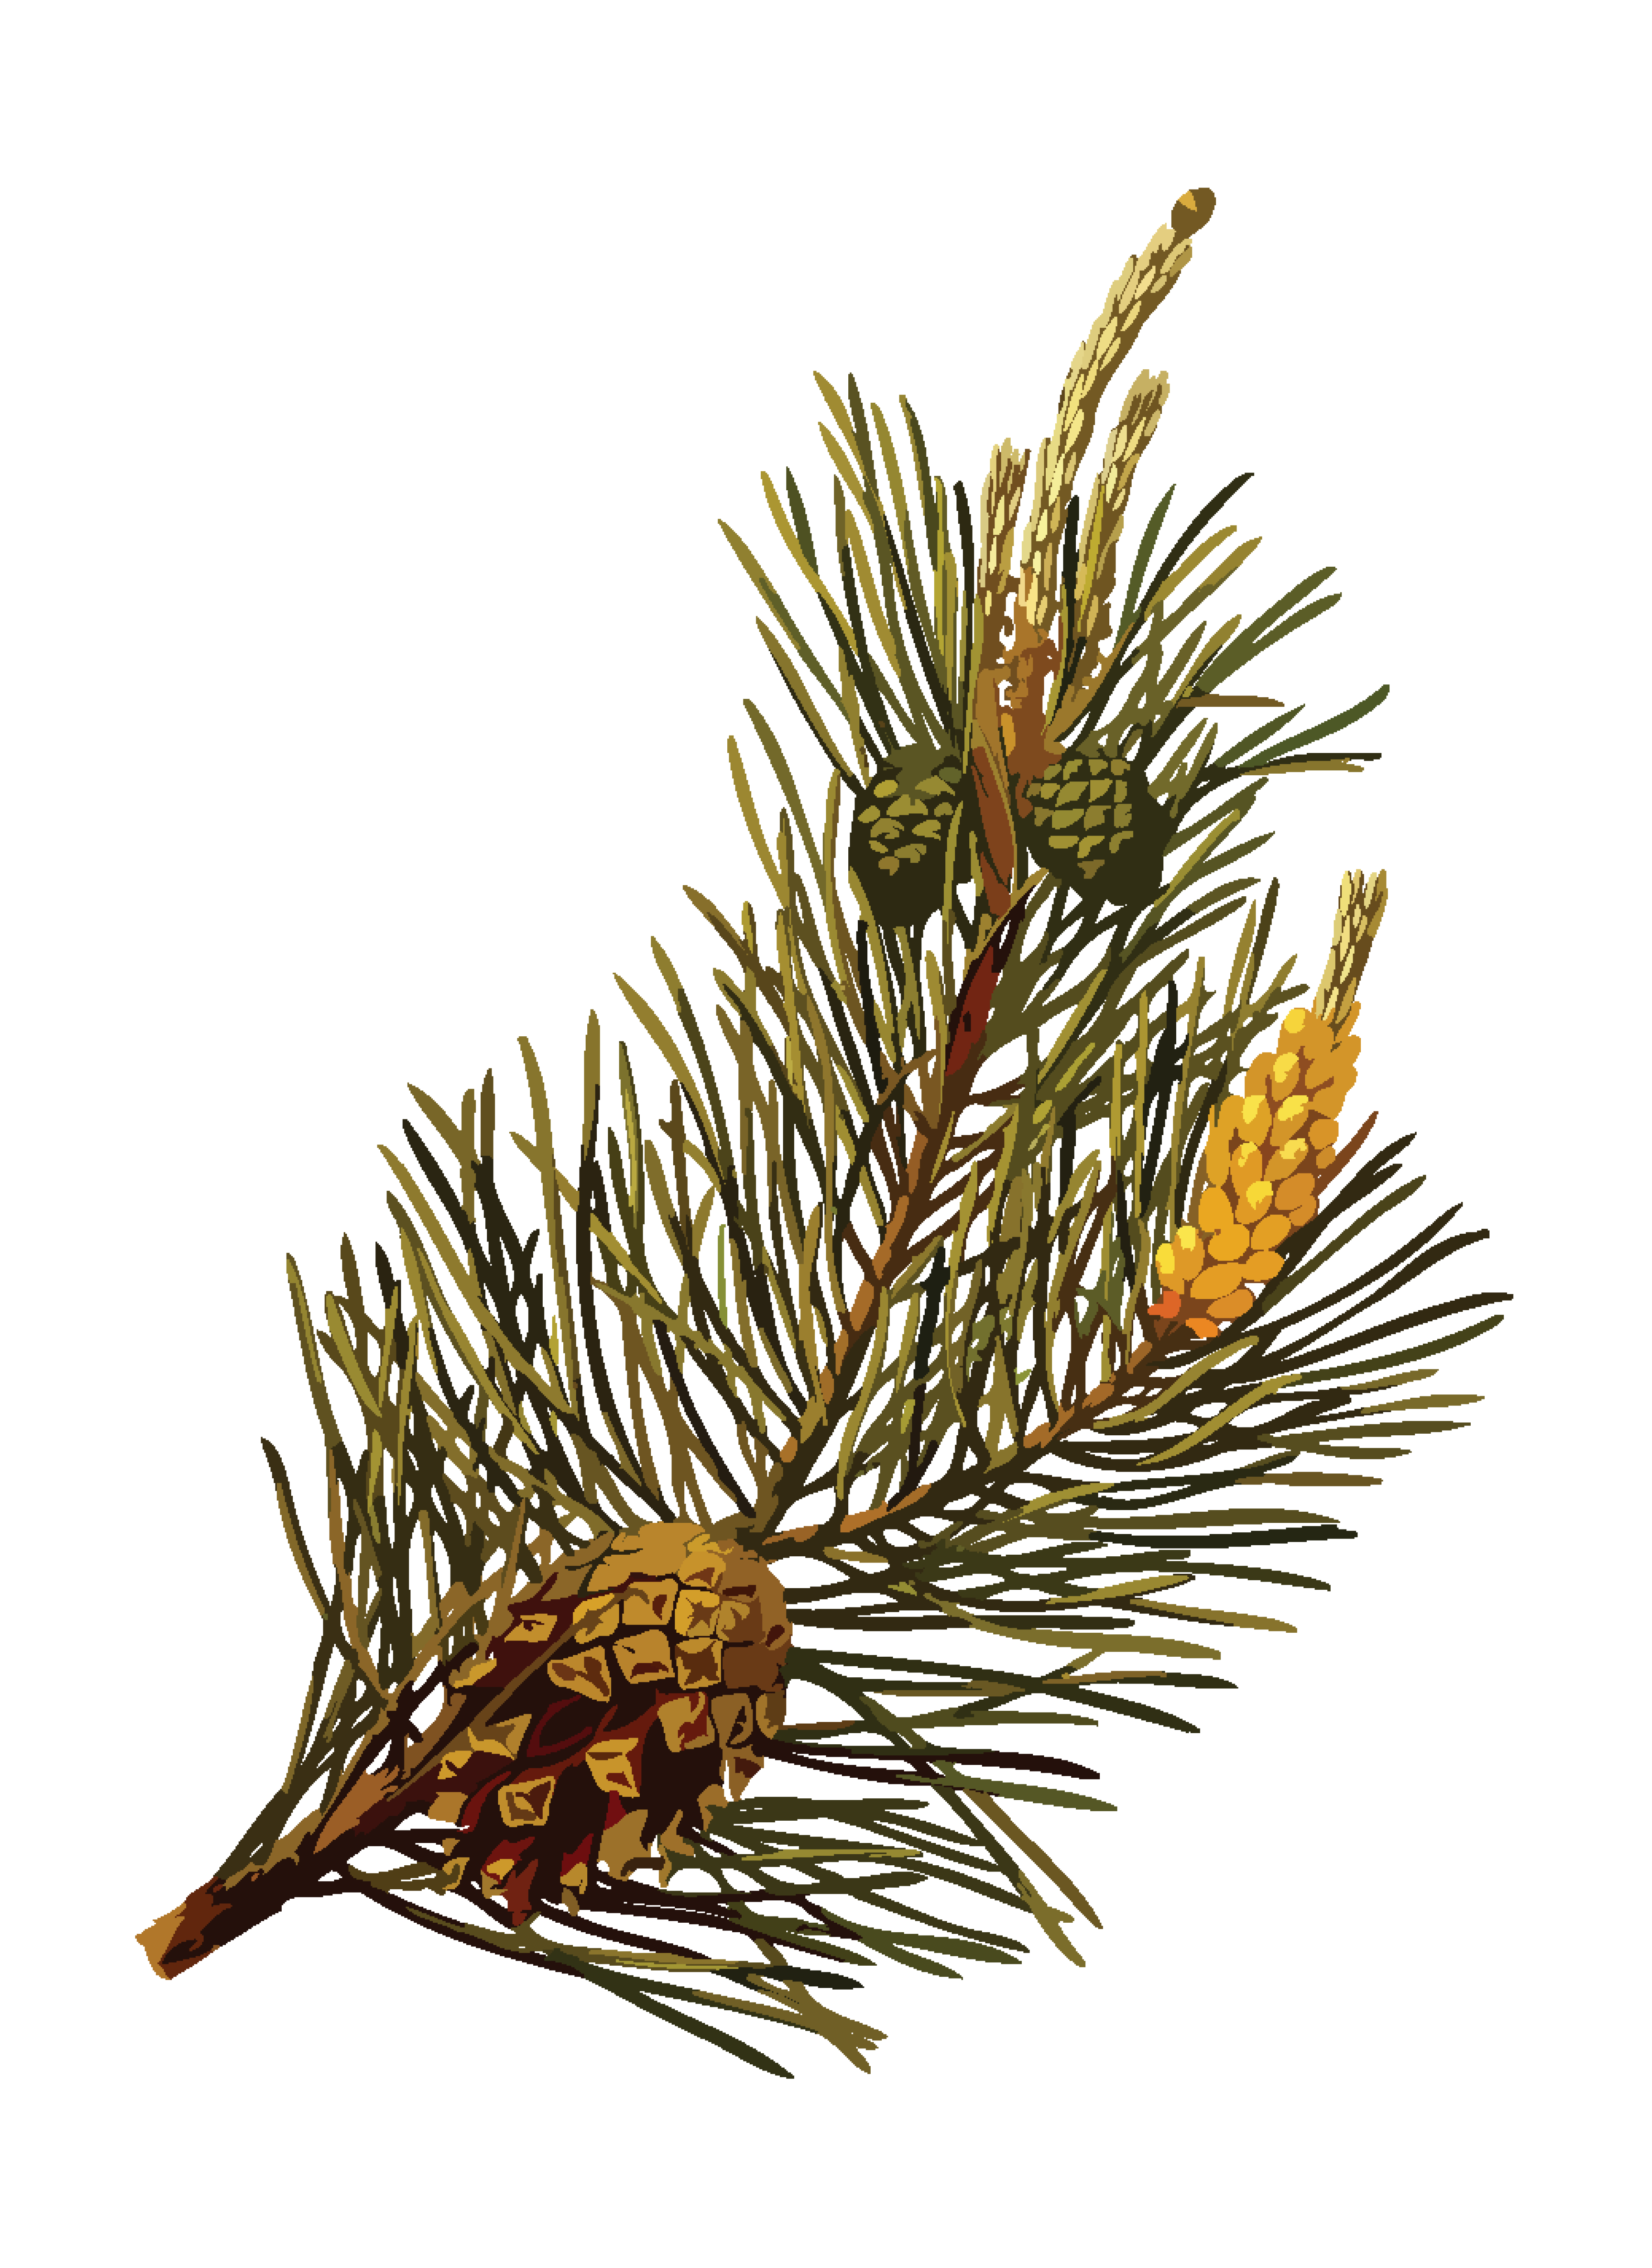 Free Clipart Of A pine branch